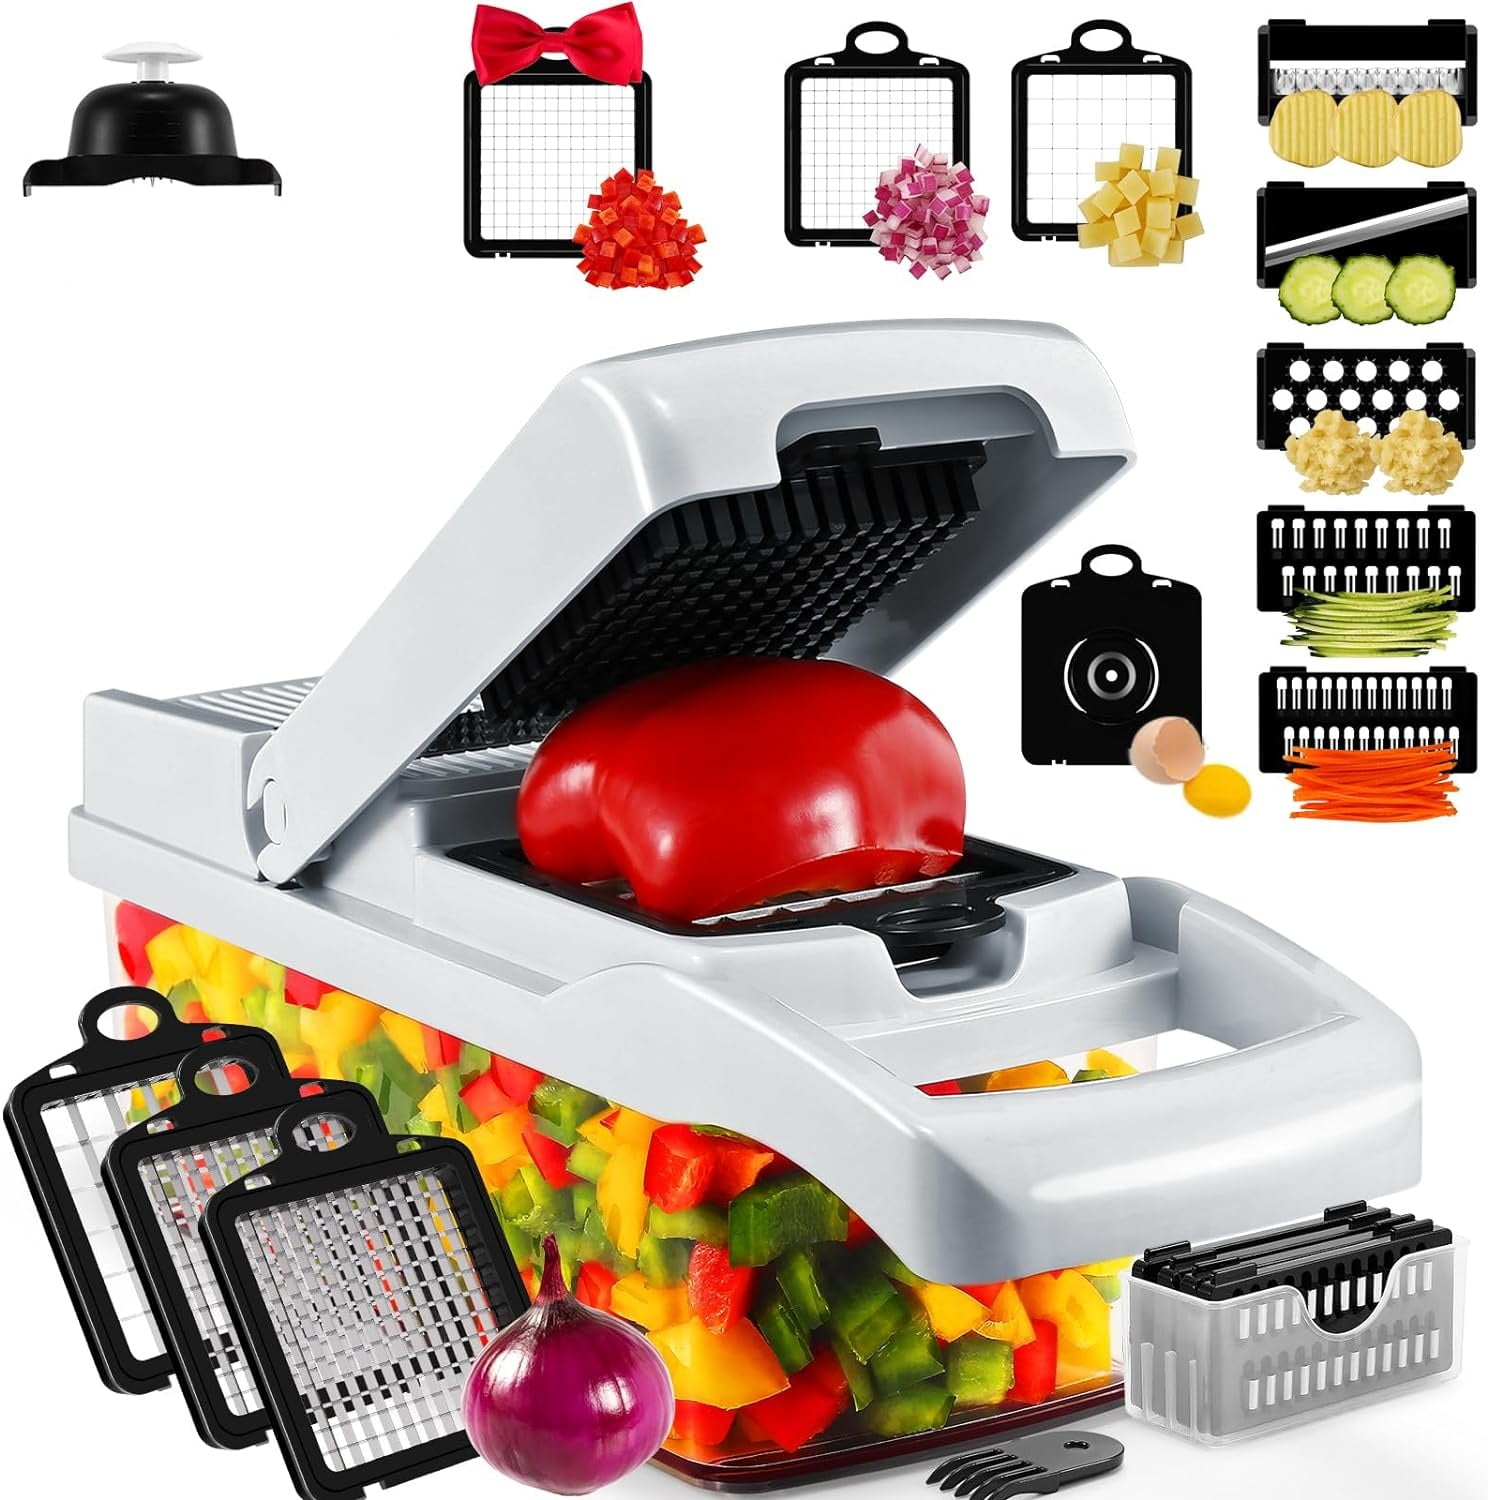 $6/mo - Finance MAIPOR Vegetable Chopper - Onion Chopper - Multifunctional  15 in 1 Professional Food Chopper - Dicer Cutter - Kitchen Veggie Chopper  with Container - Egg Slicer